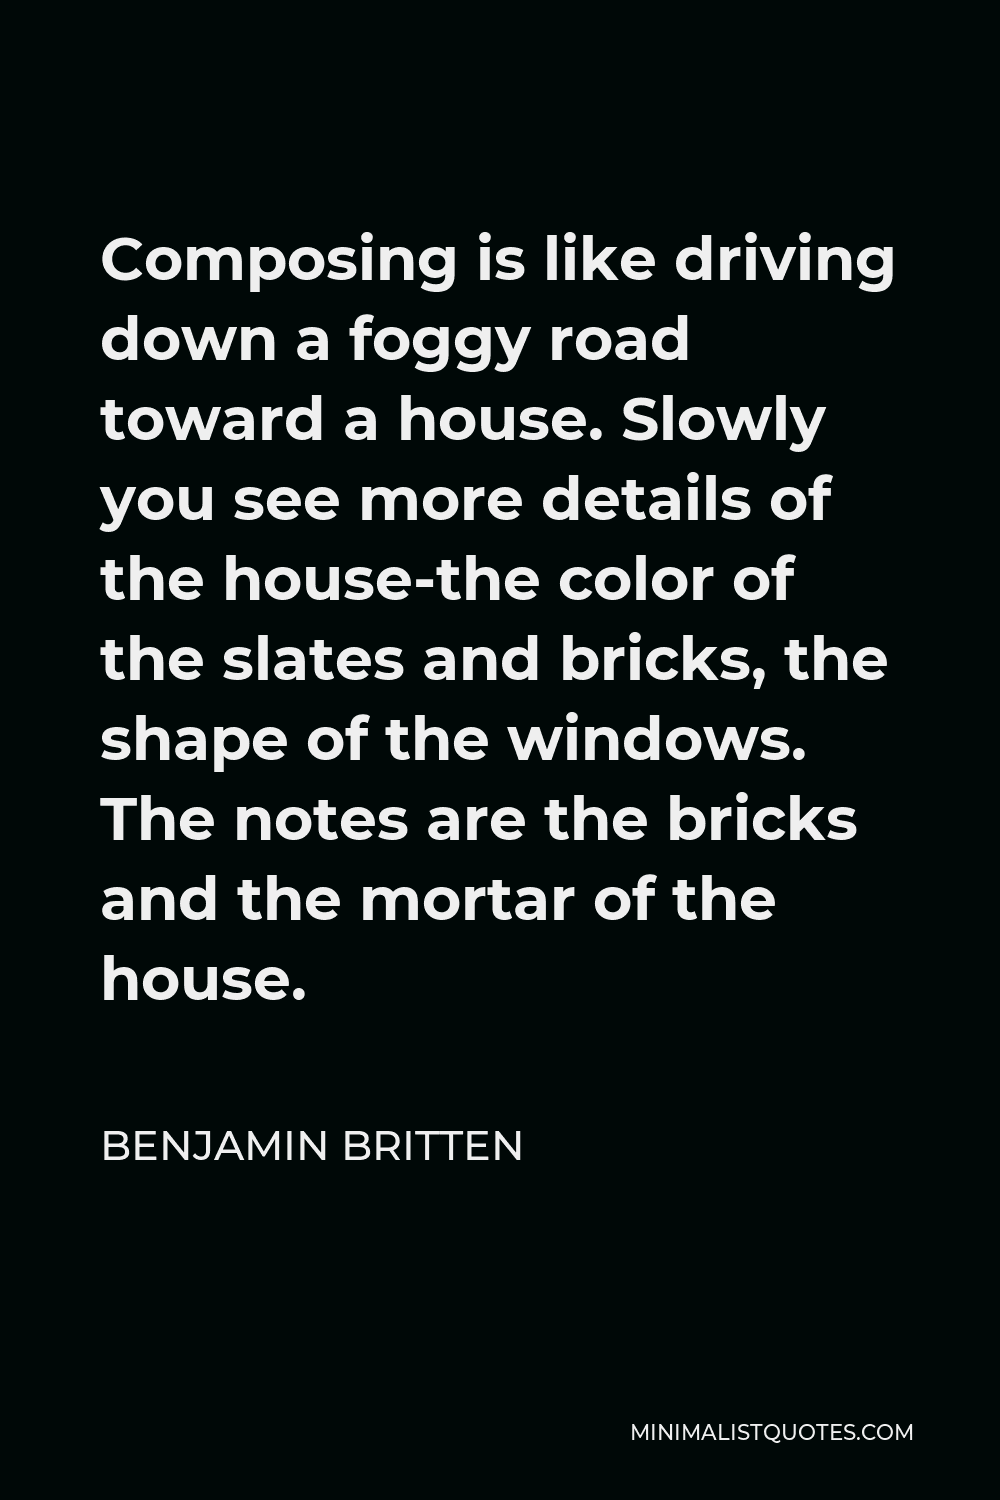 Benjamin Britten Quote - Composing is like driving down a foggy road toward a house. Slowly you see more details of the house-the color of the slates and bricks, the shape of the windows. The notes are the bricks and the mortar of the house.